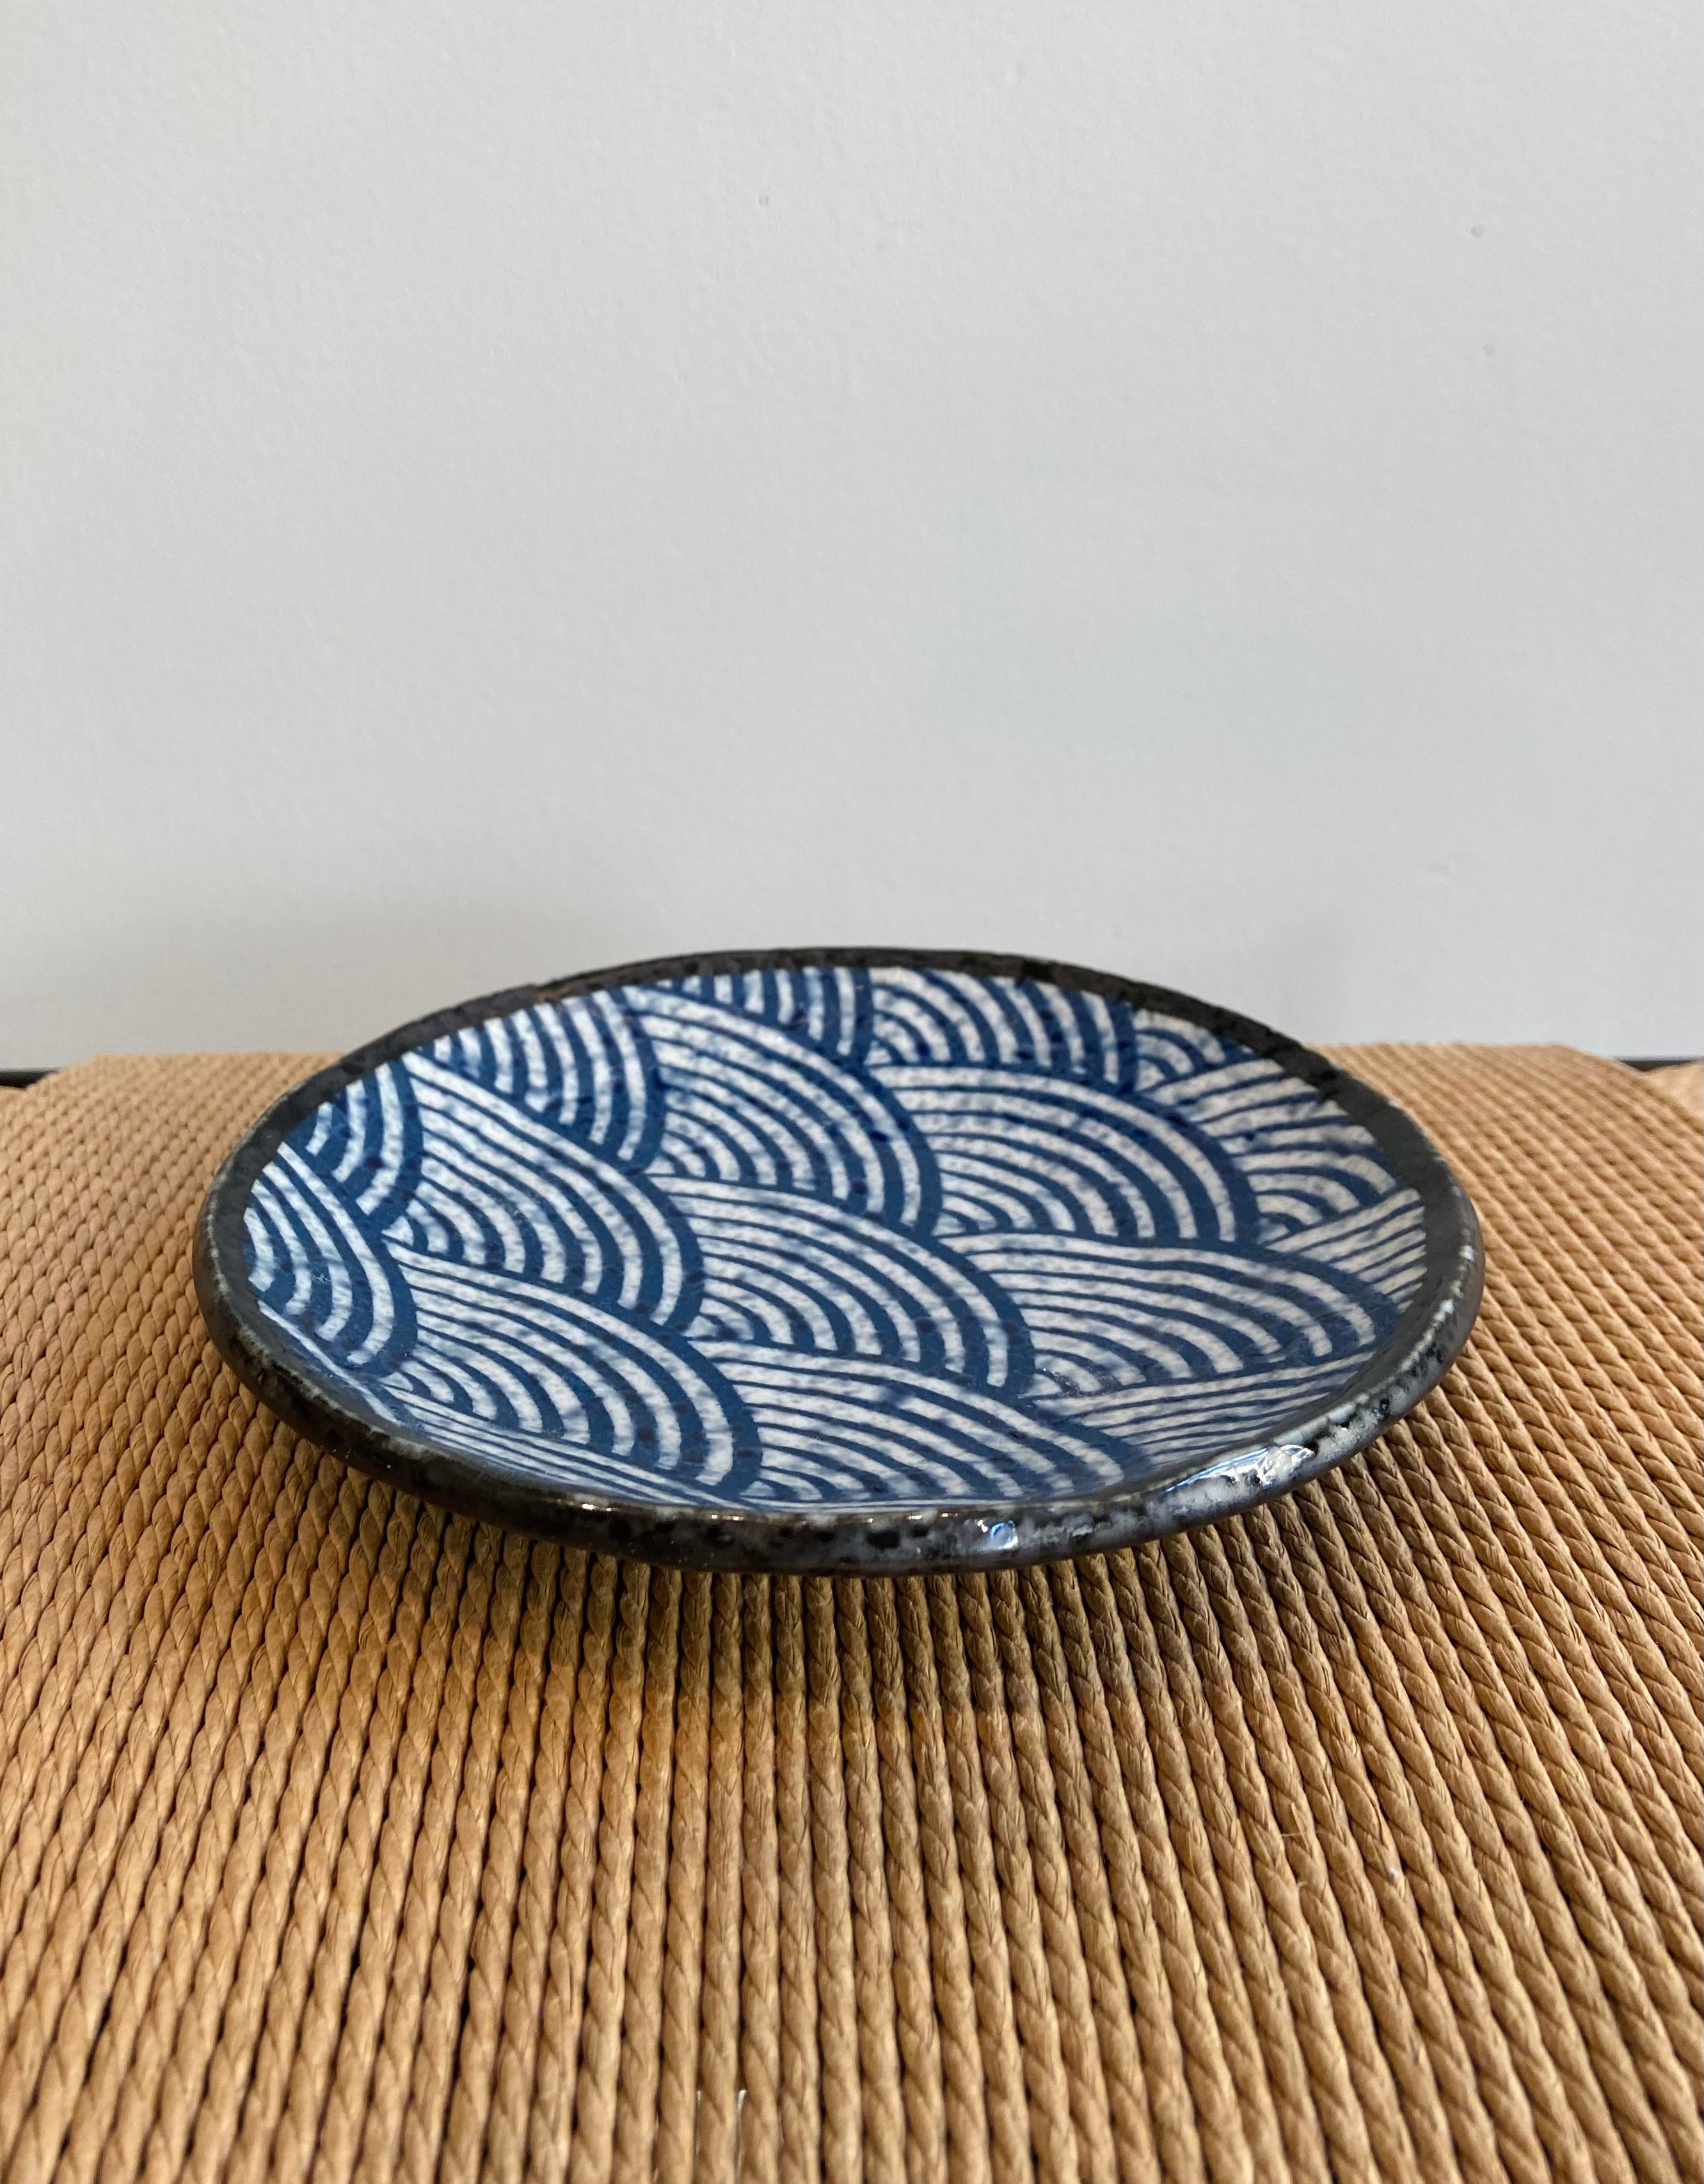 Blue plate with waves, small